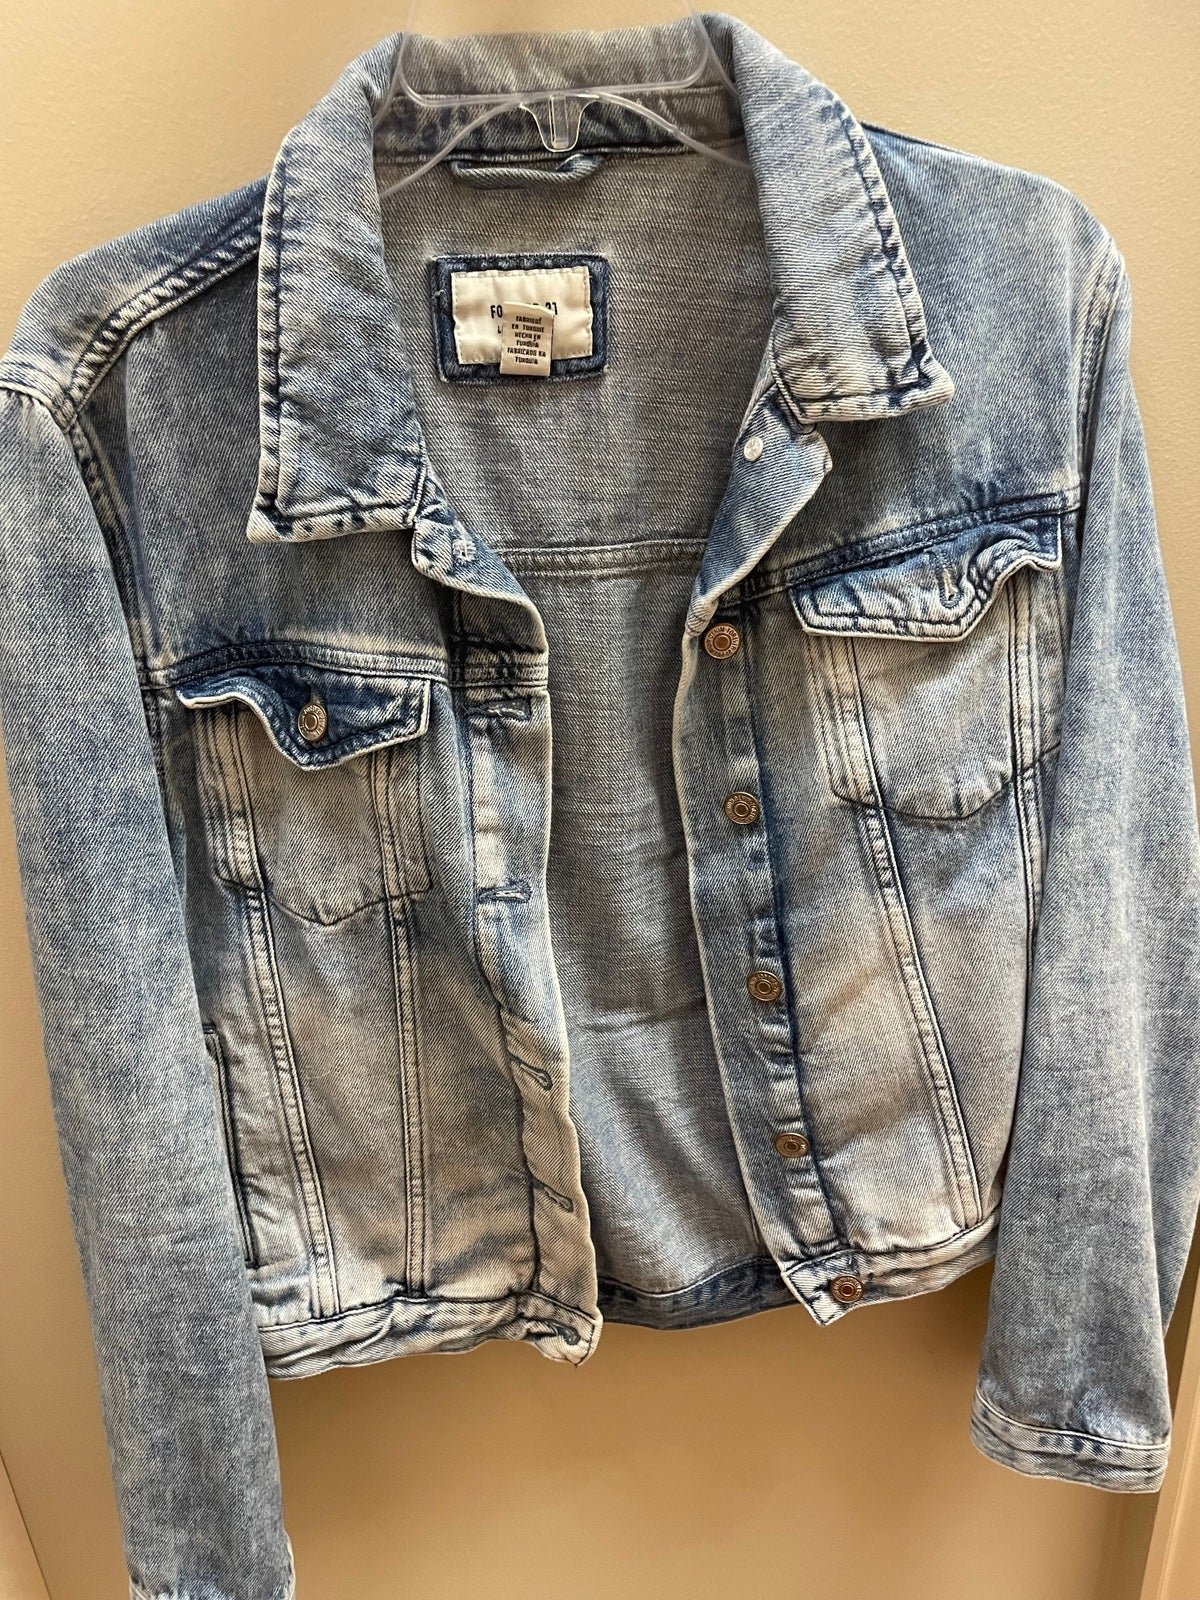 Special offer  Forever 21 Jean Jacket lGriOMZgs all for